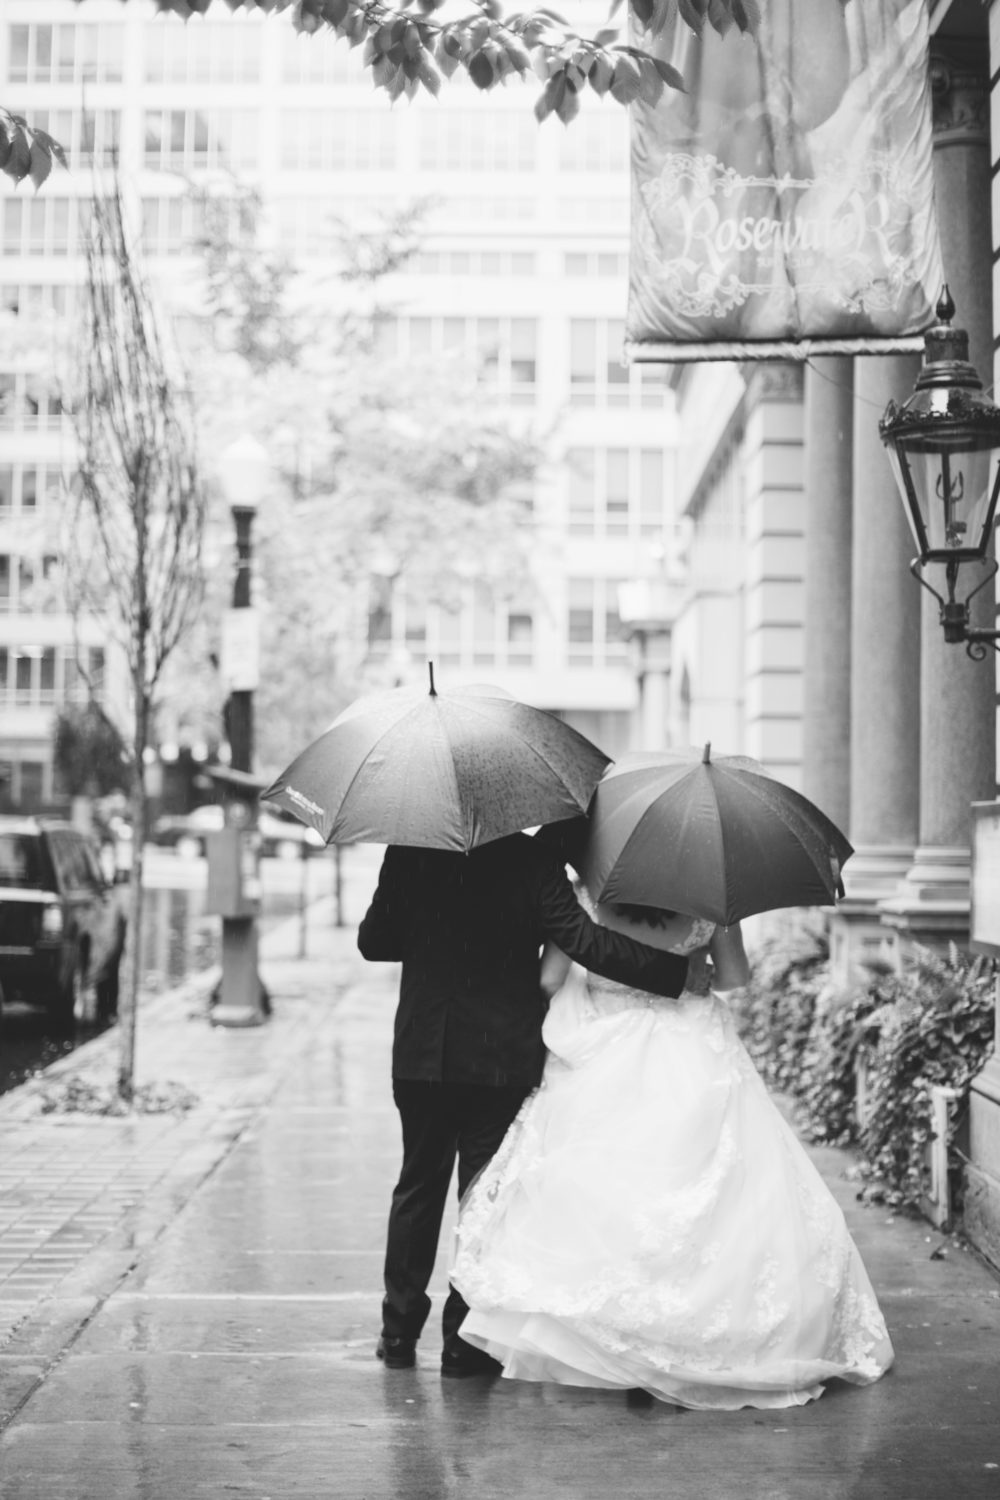 Wedding photography in the rain, couple walking down a street holding umbrellas.